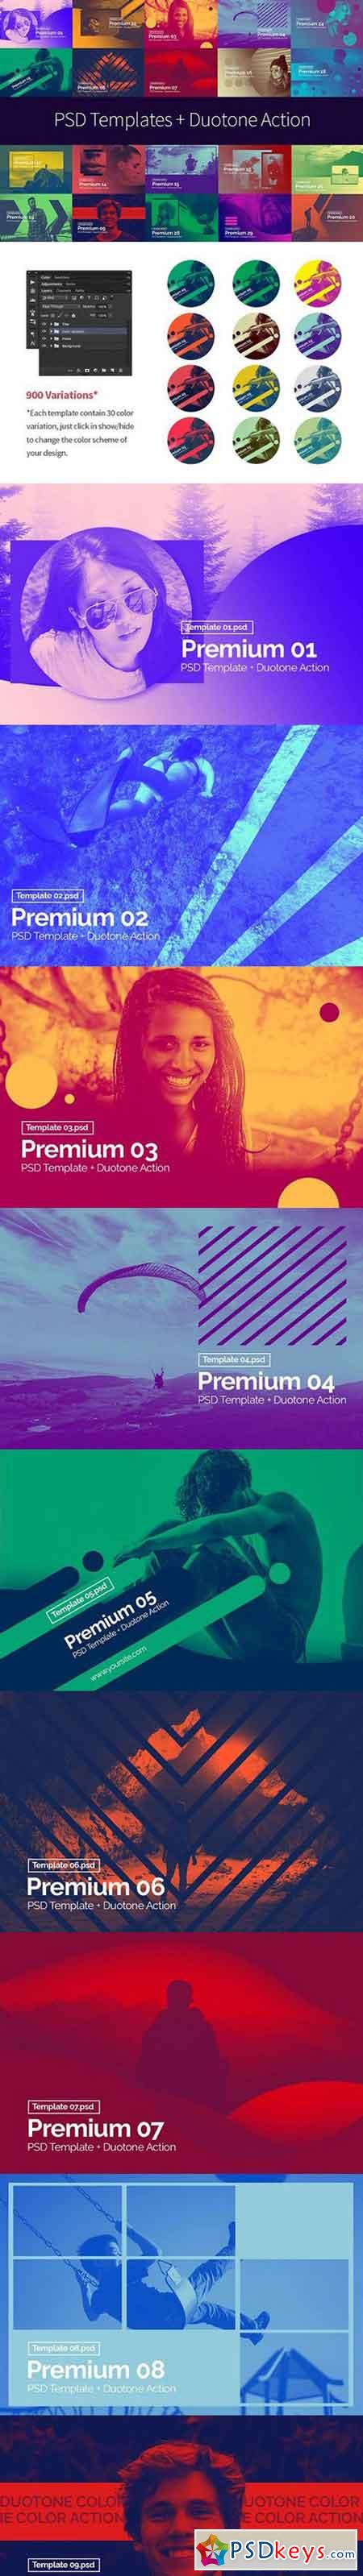 PSD Template + Duotone Action 1438417